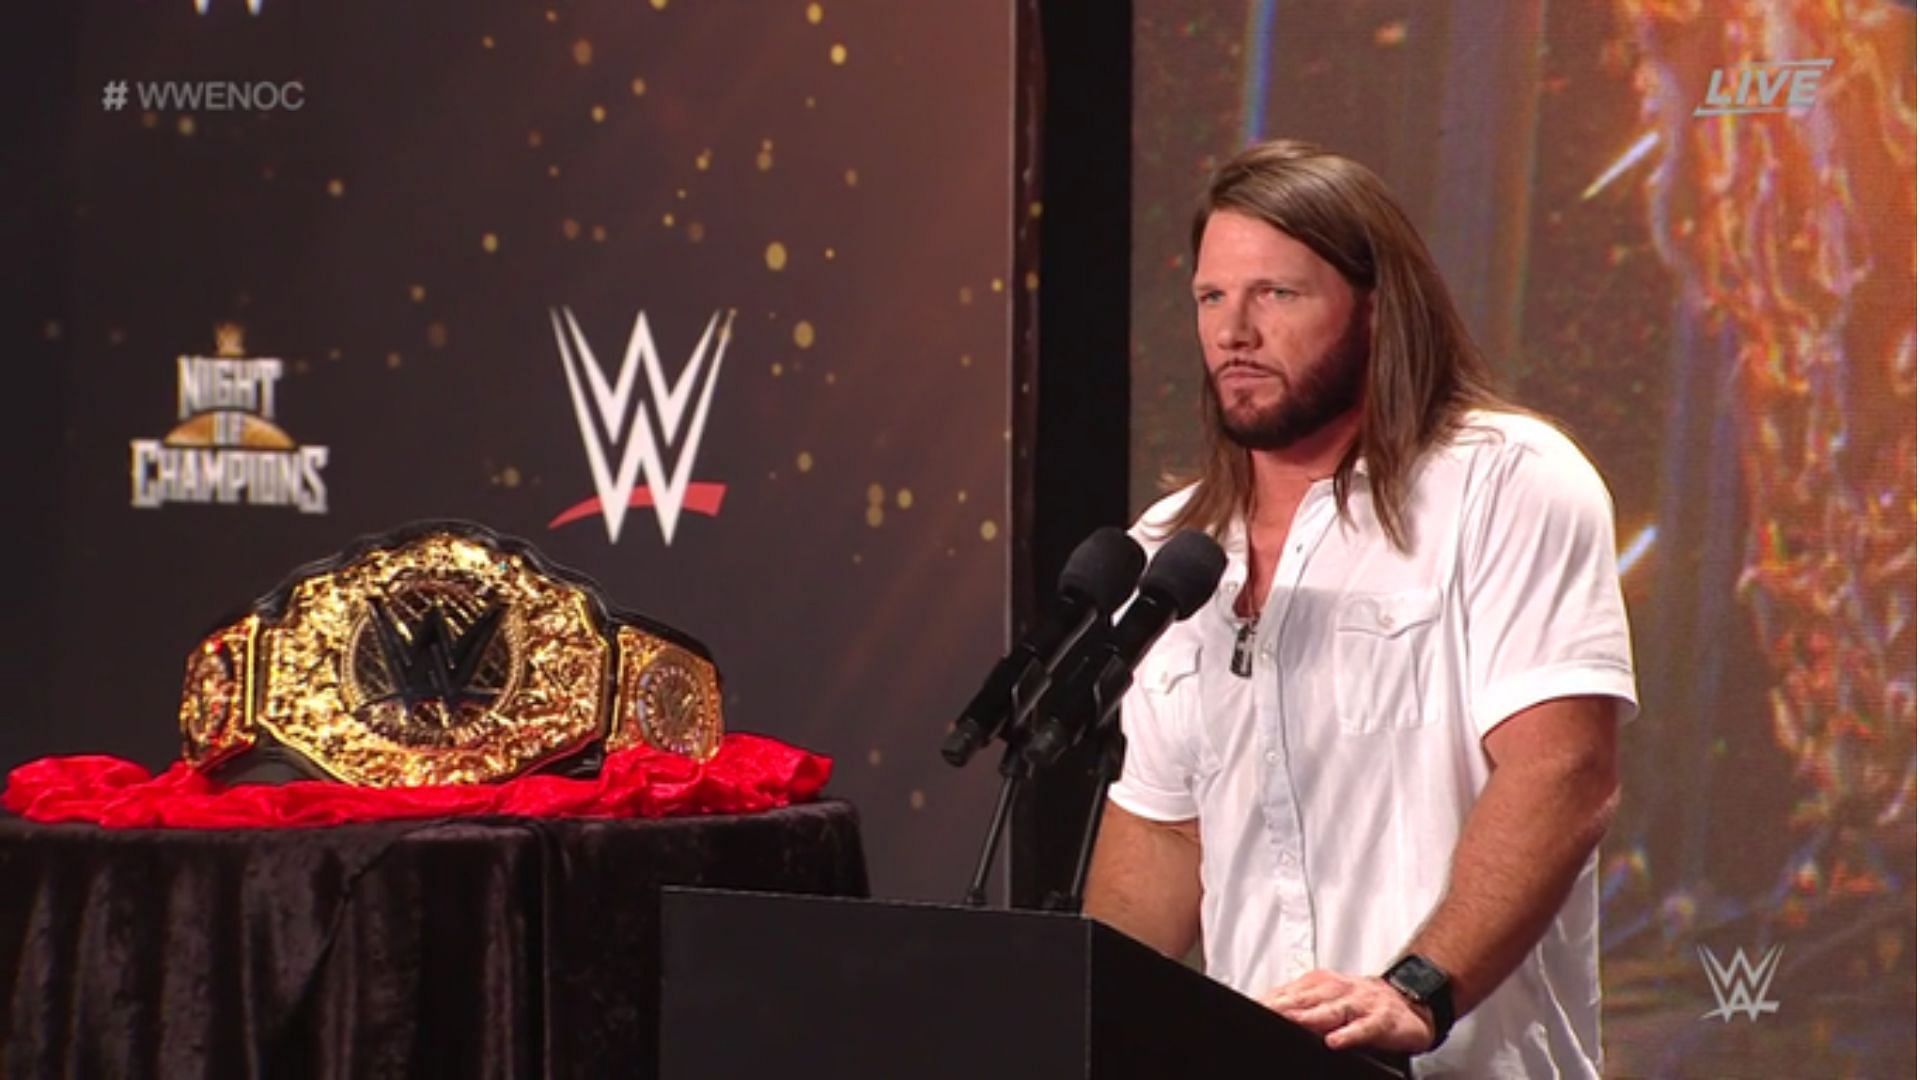 AJ Styles could close out the Night of Champions premium live event as the new World Heavyweight Champion!